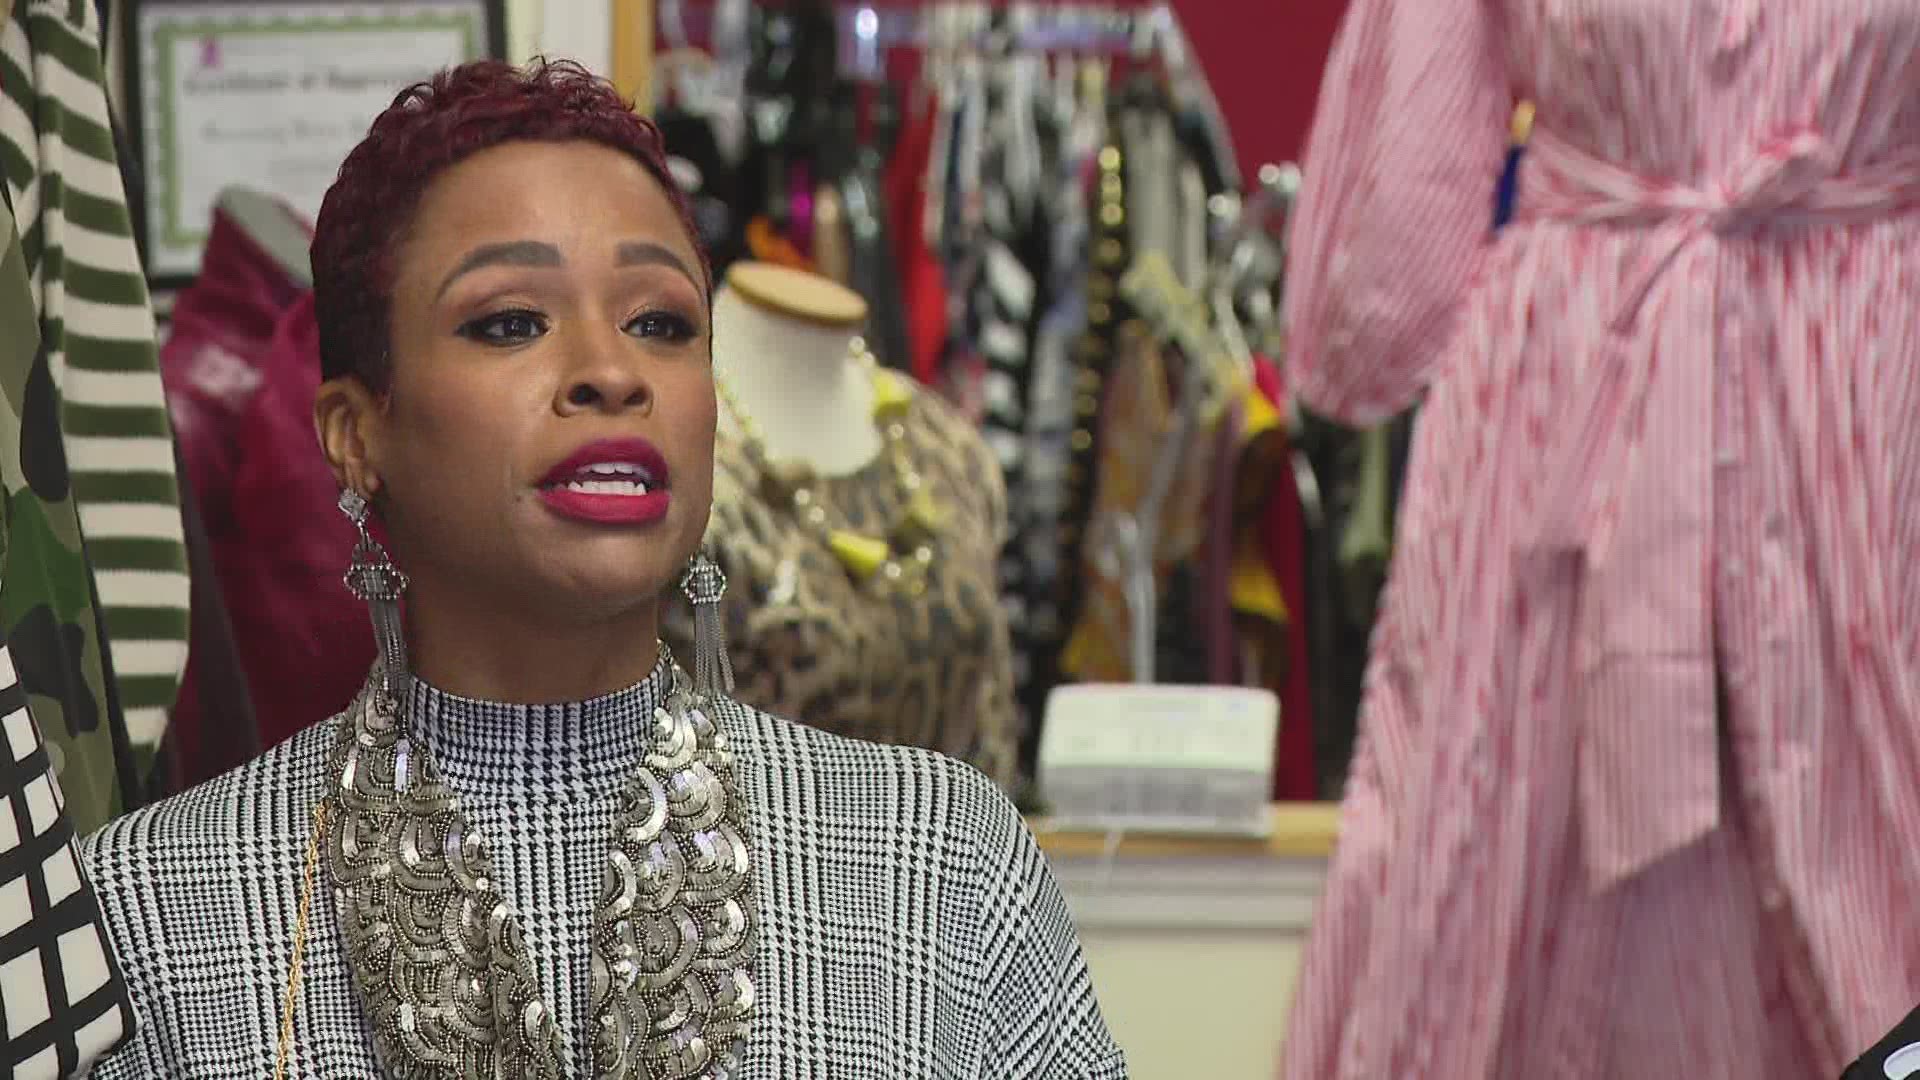 The owners of Runway Diva Boutique are three sisters who opened 10 years ago.